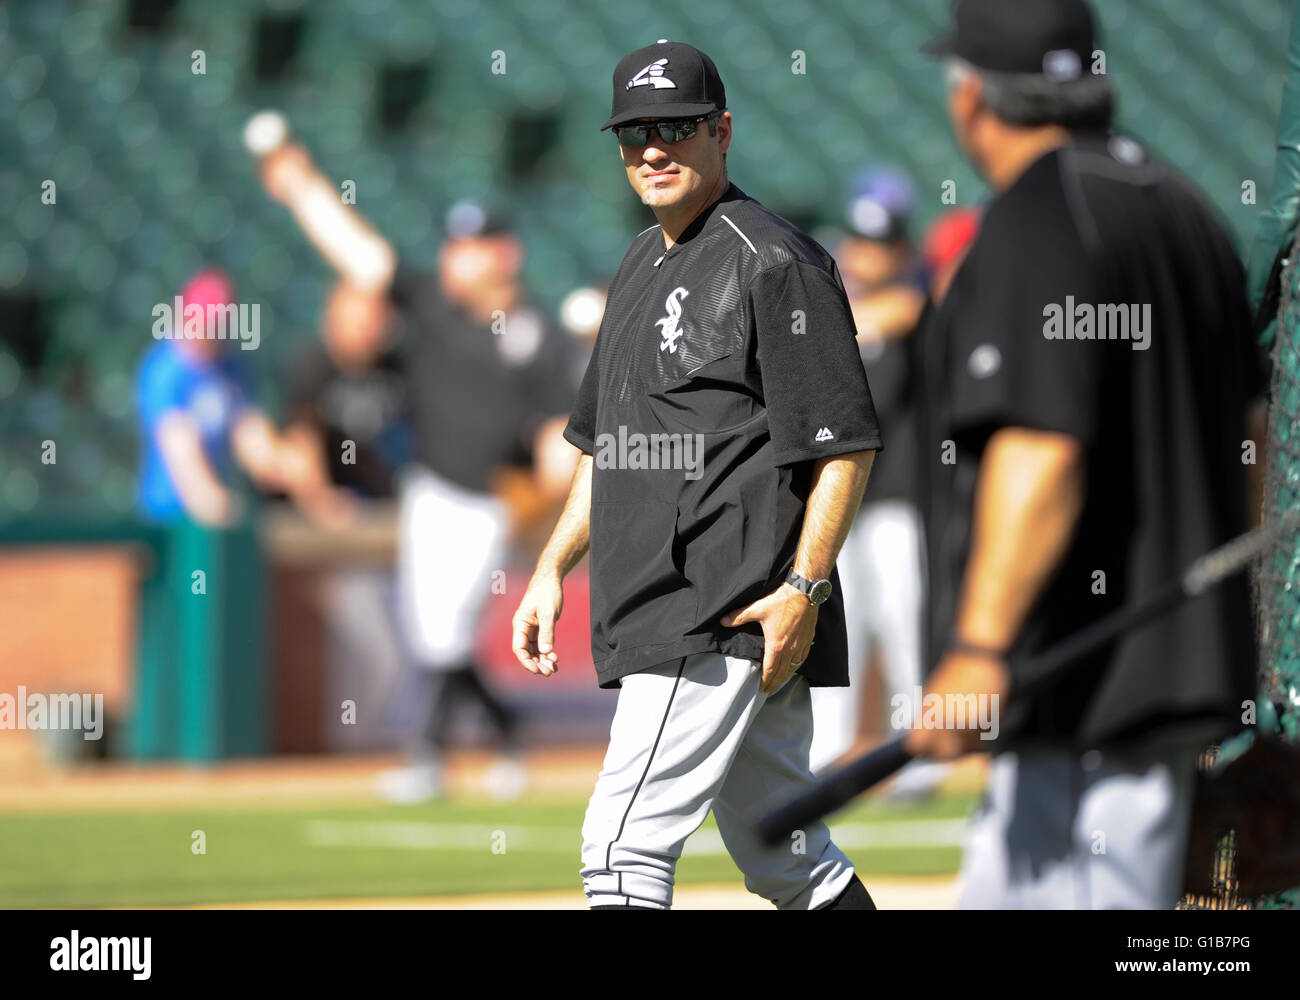 May 09, 2016: Chicago White Sox manager Robin Ventura #23 during